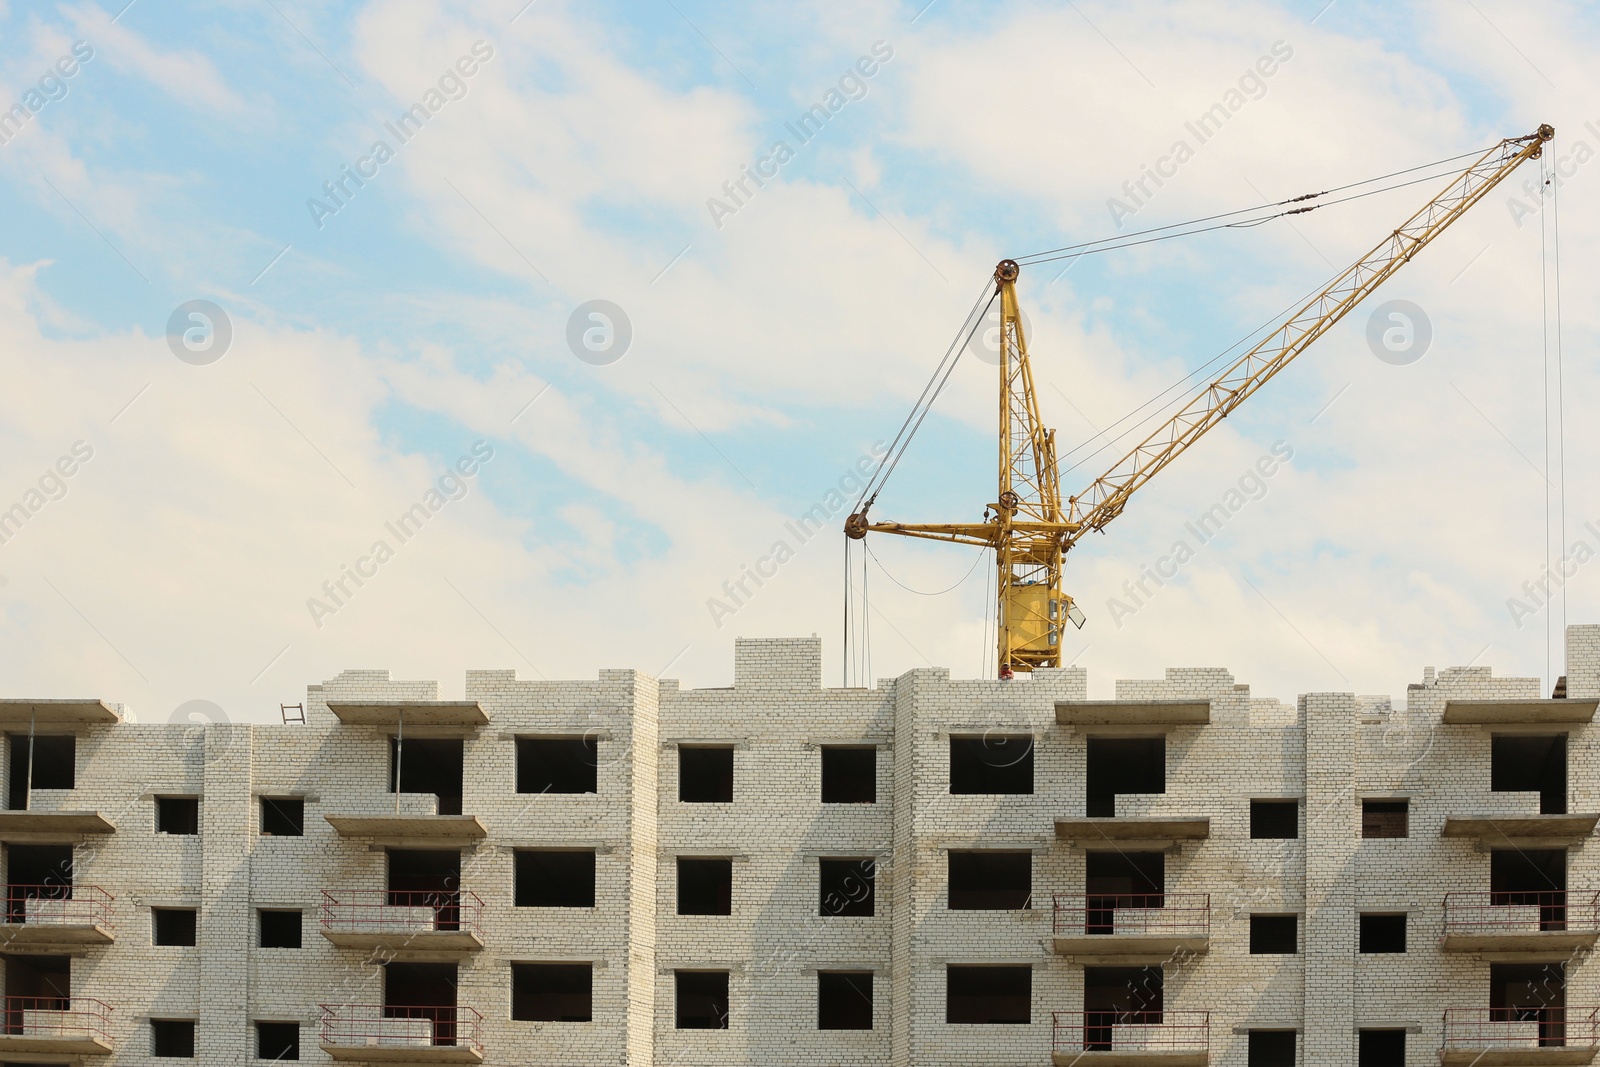 Photo of Yellow construction crane near unfinished building outdoors